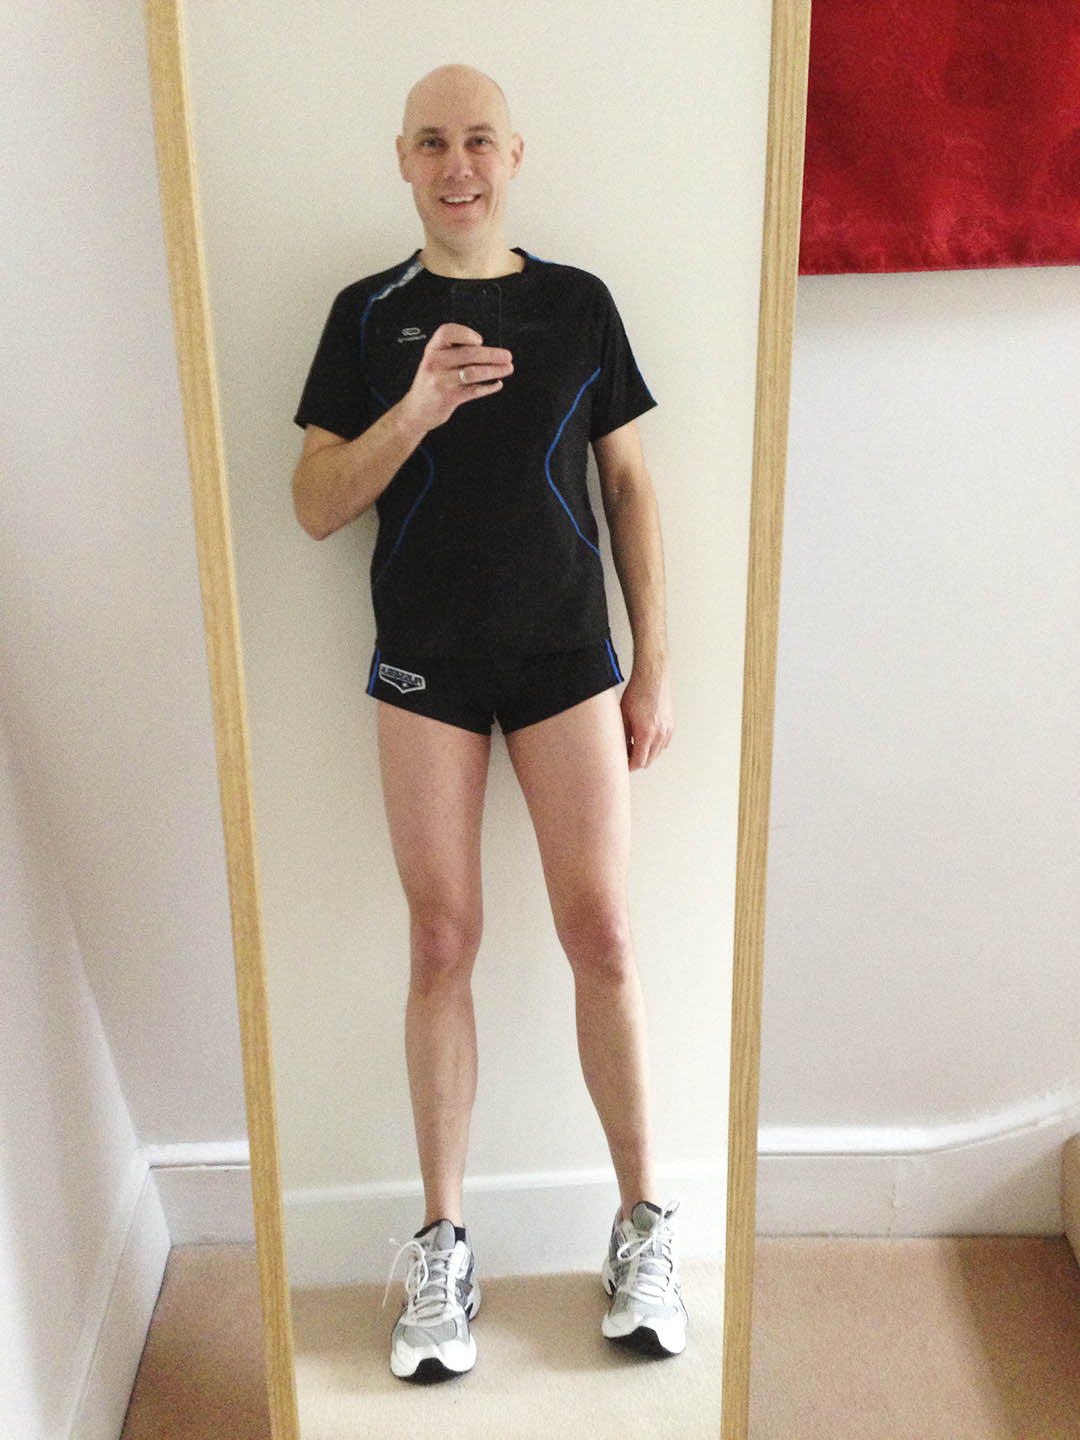 92.Â  A great submission from a guy who wears short shorts.Â  I hope he gets